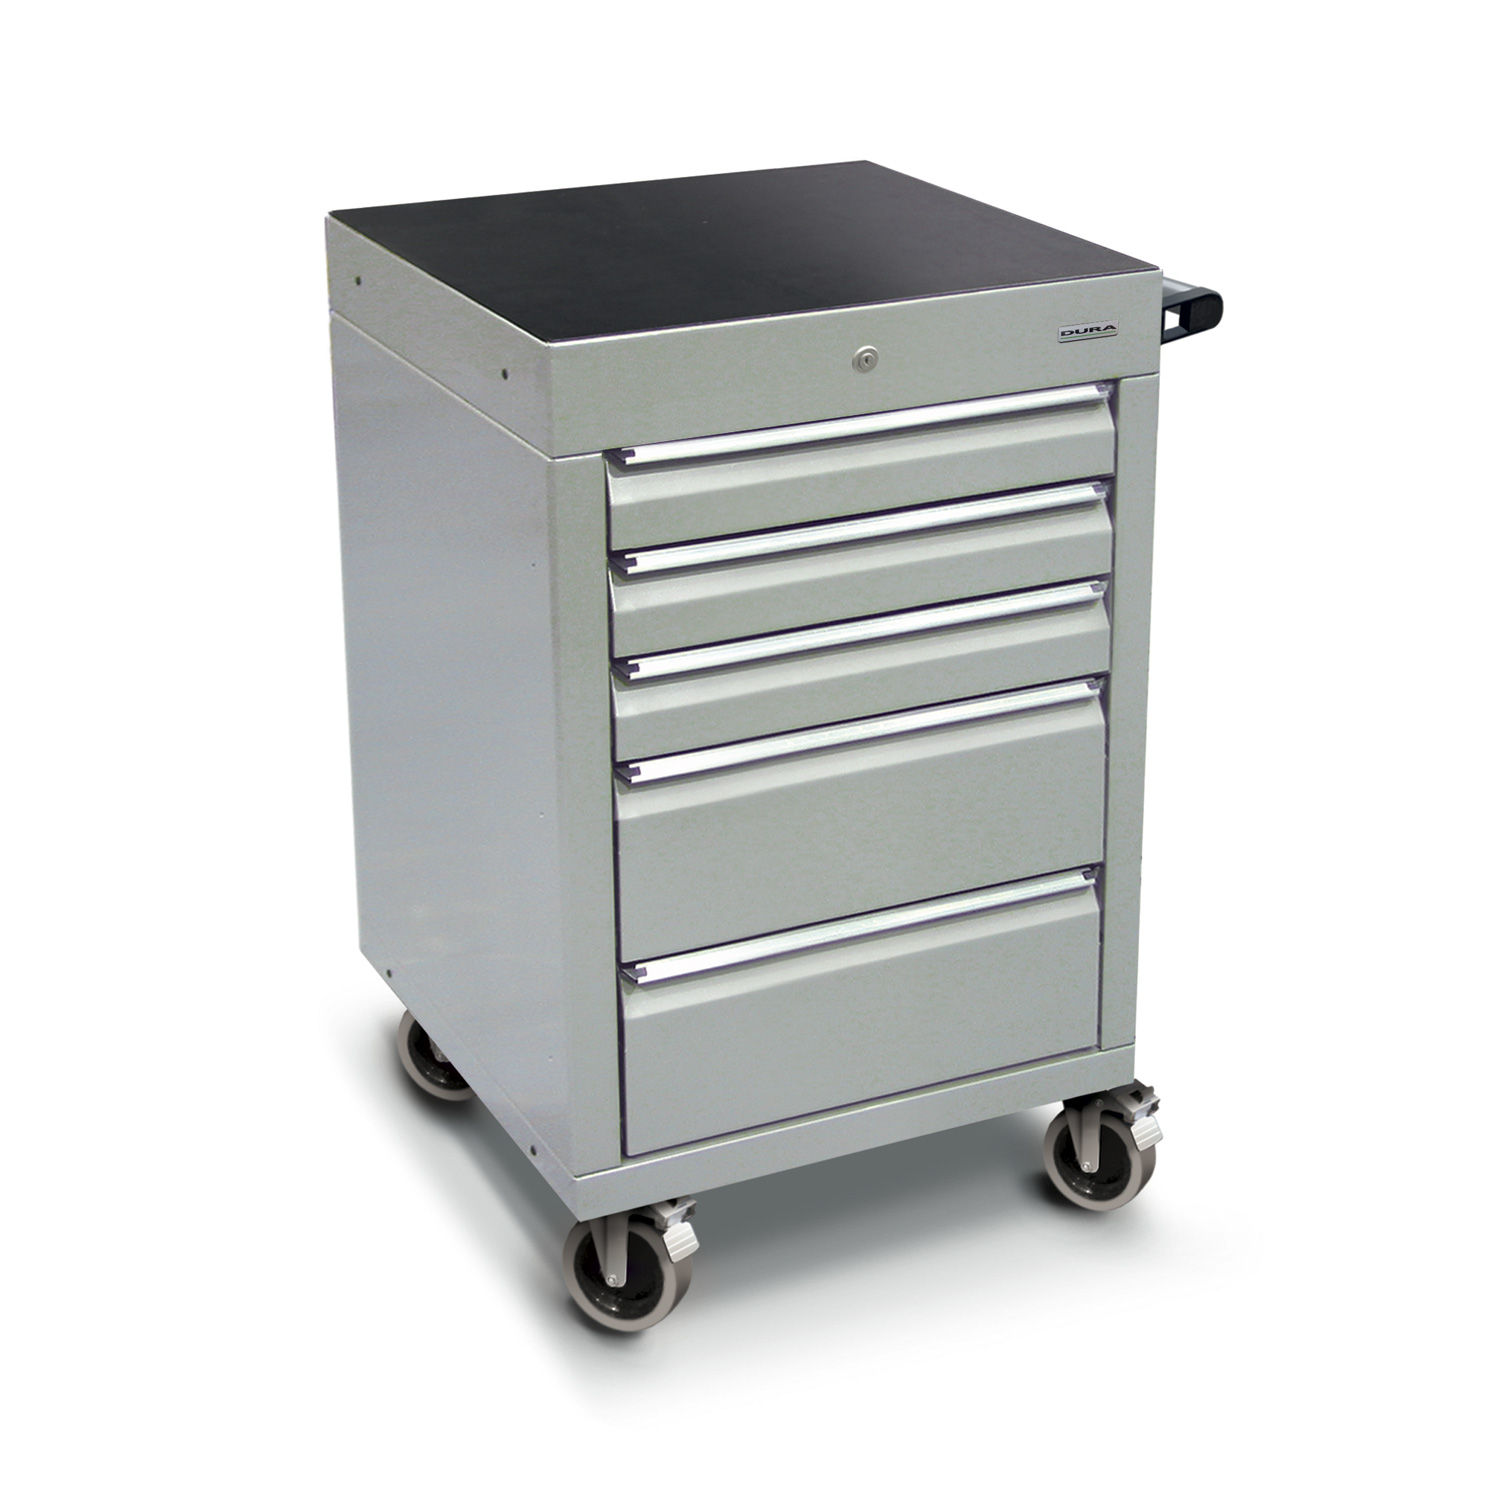 600 series cabinet with 5 drawers (3 medium, 2 large) and castors